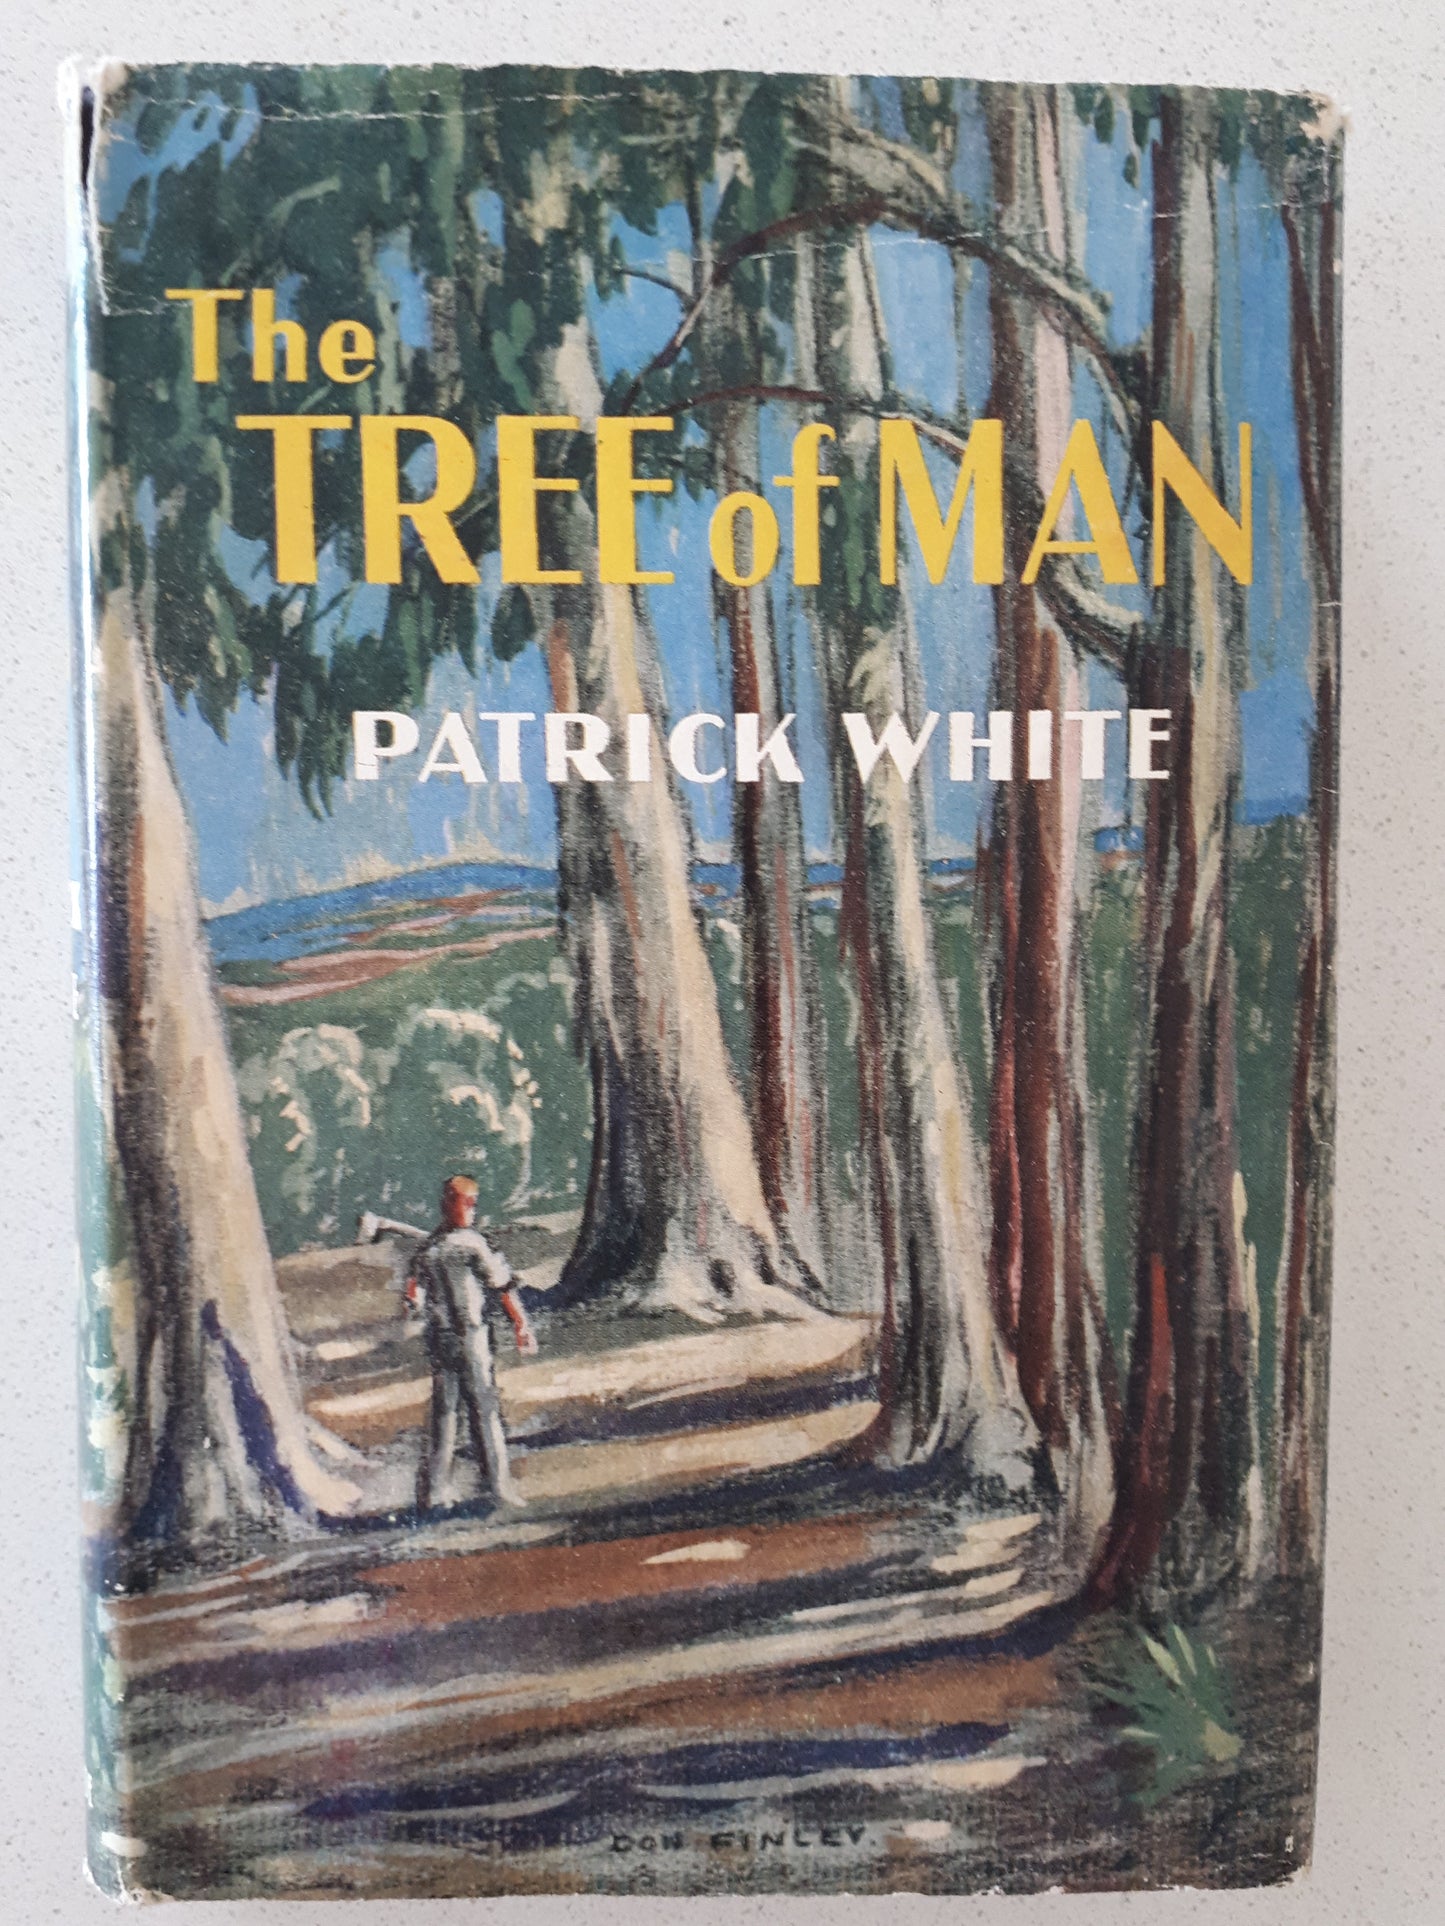 The Tree of Man by Patrick White